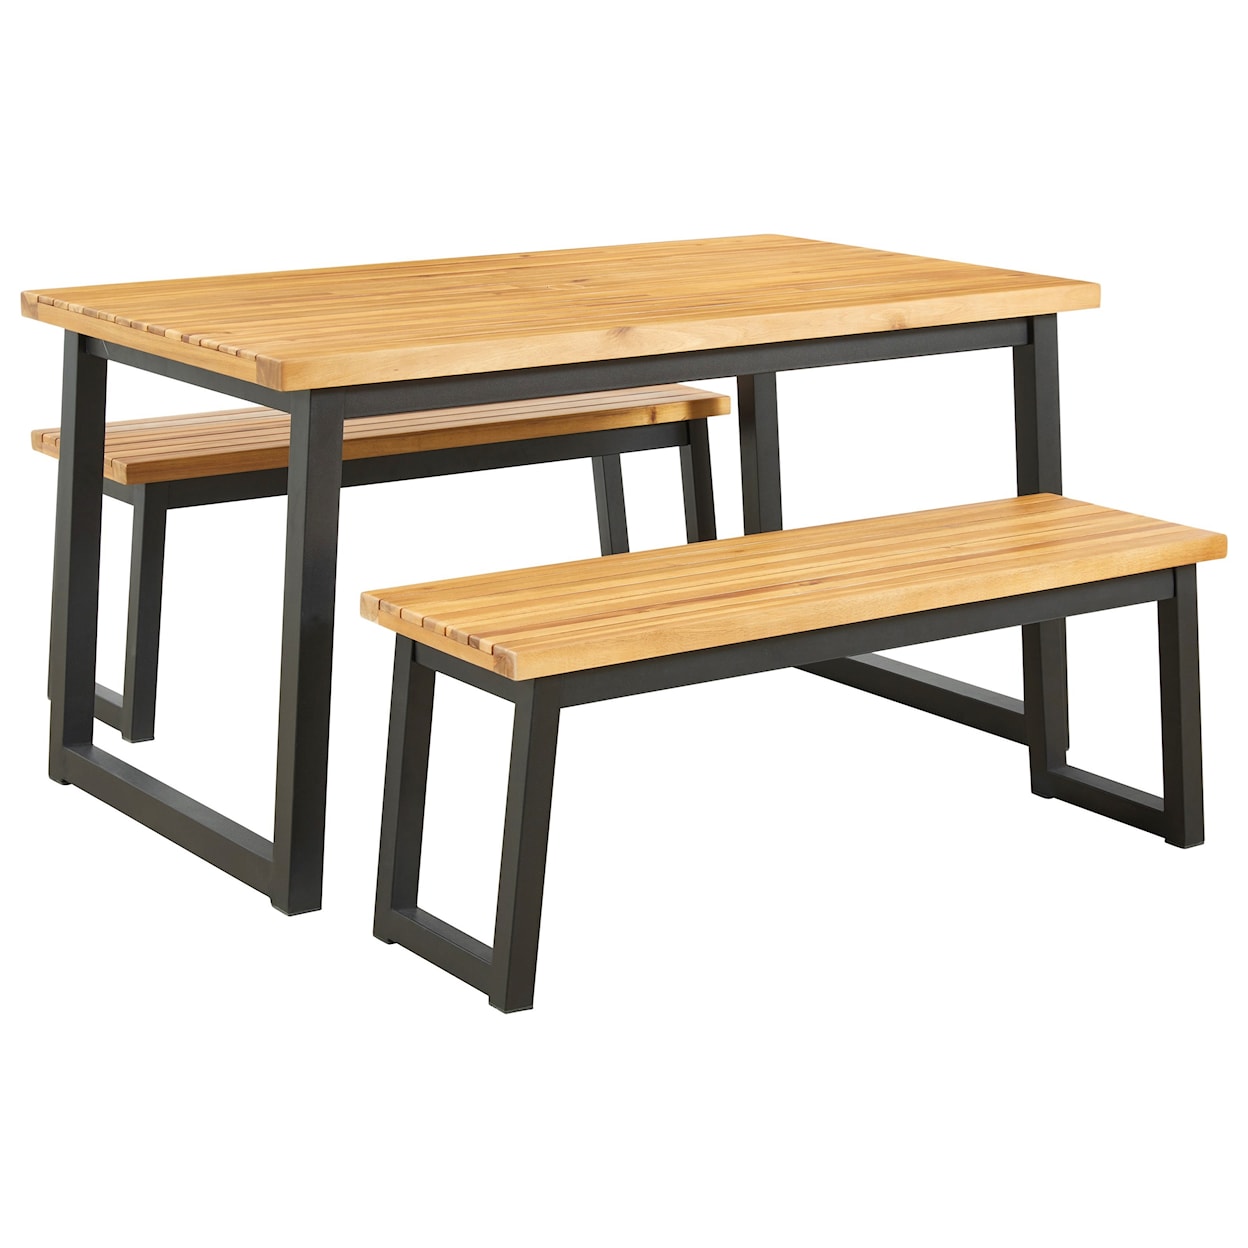 Signature Town Wood Dining Table Set